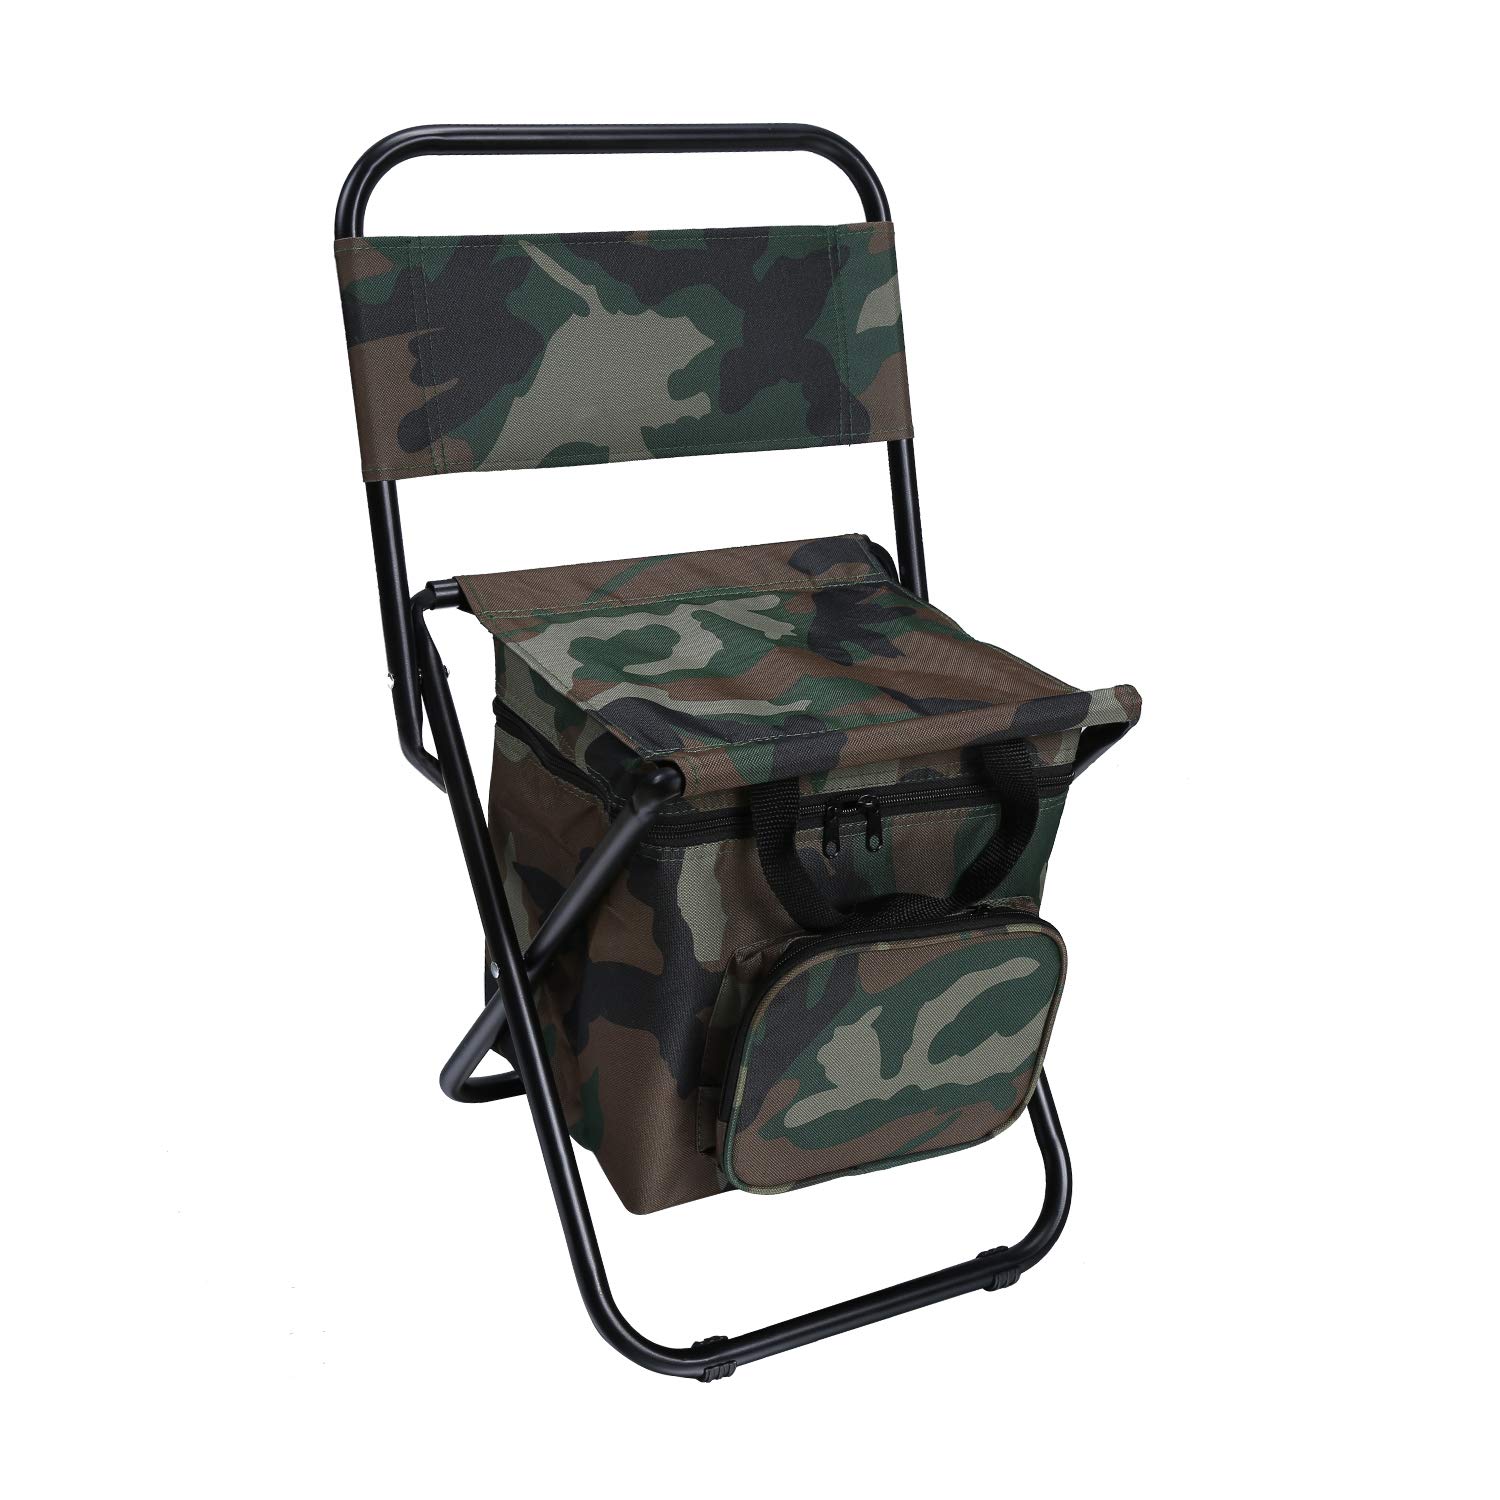 LEADALLWAY Fishing Chair with Cooler Bag Foldable Compact Fishing Stool,Camouflage